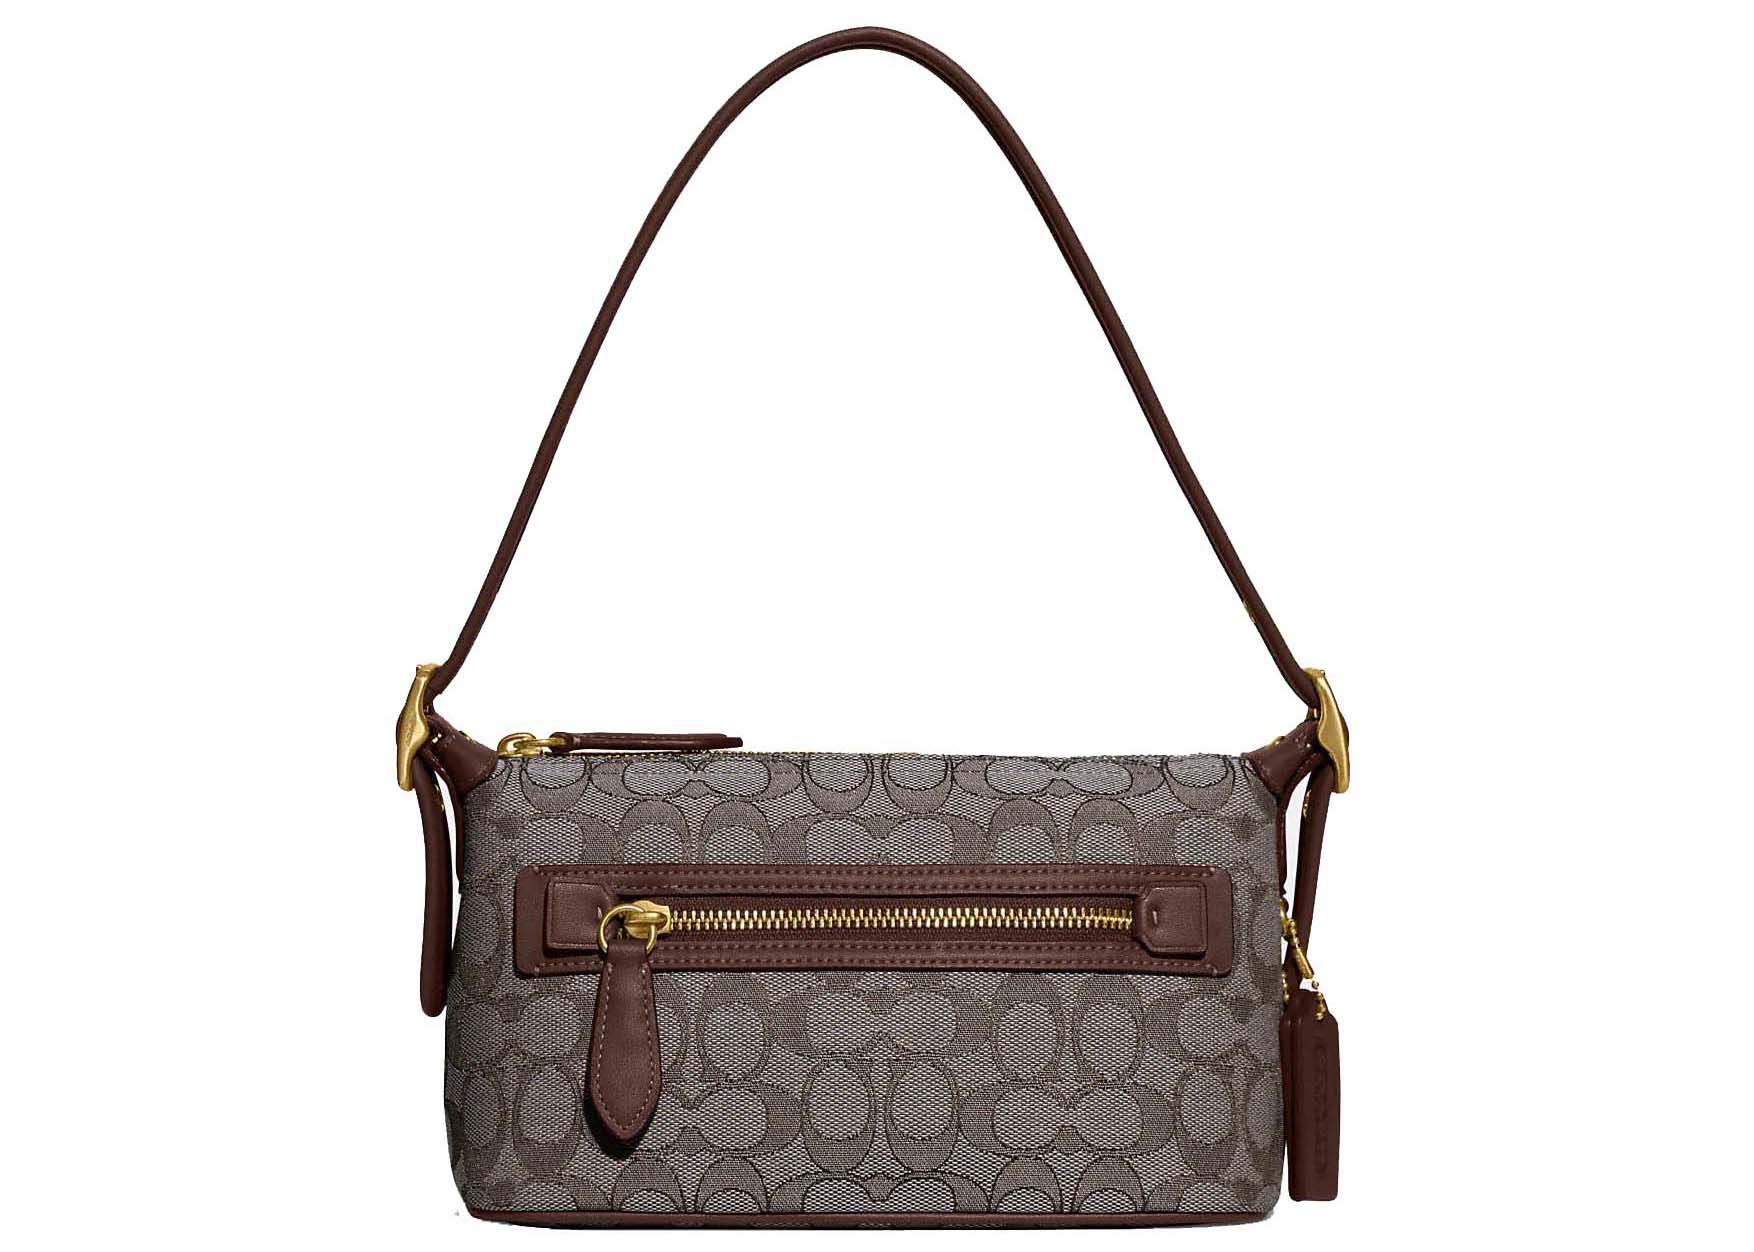 COACH Signature Embossed Gunmetal Shoulder Bag #29739 – ALL YOUR BLISS